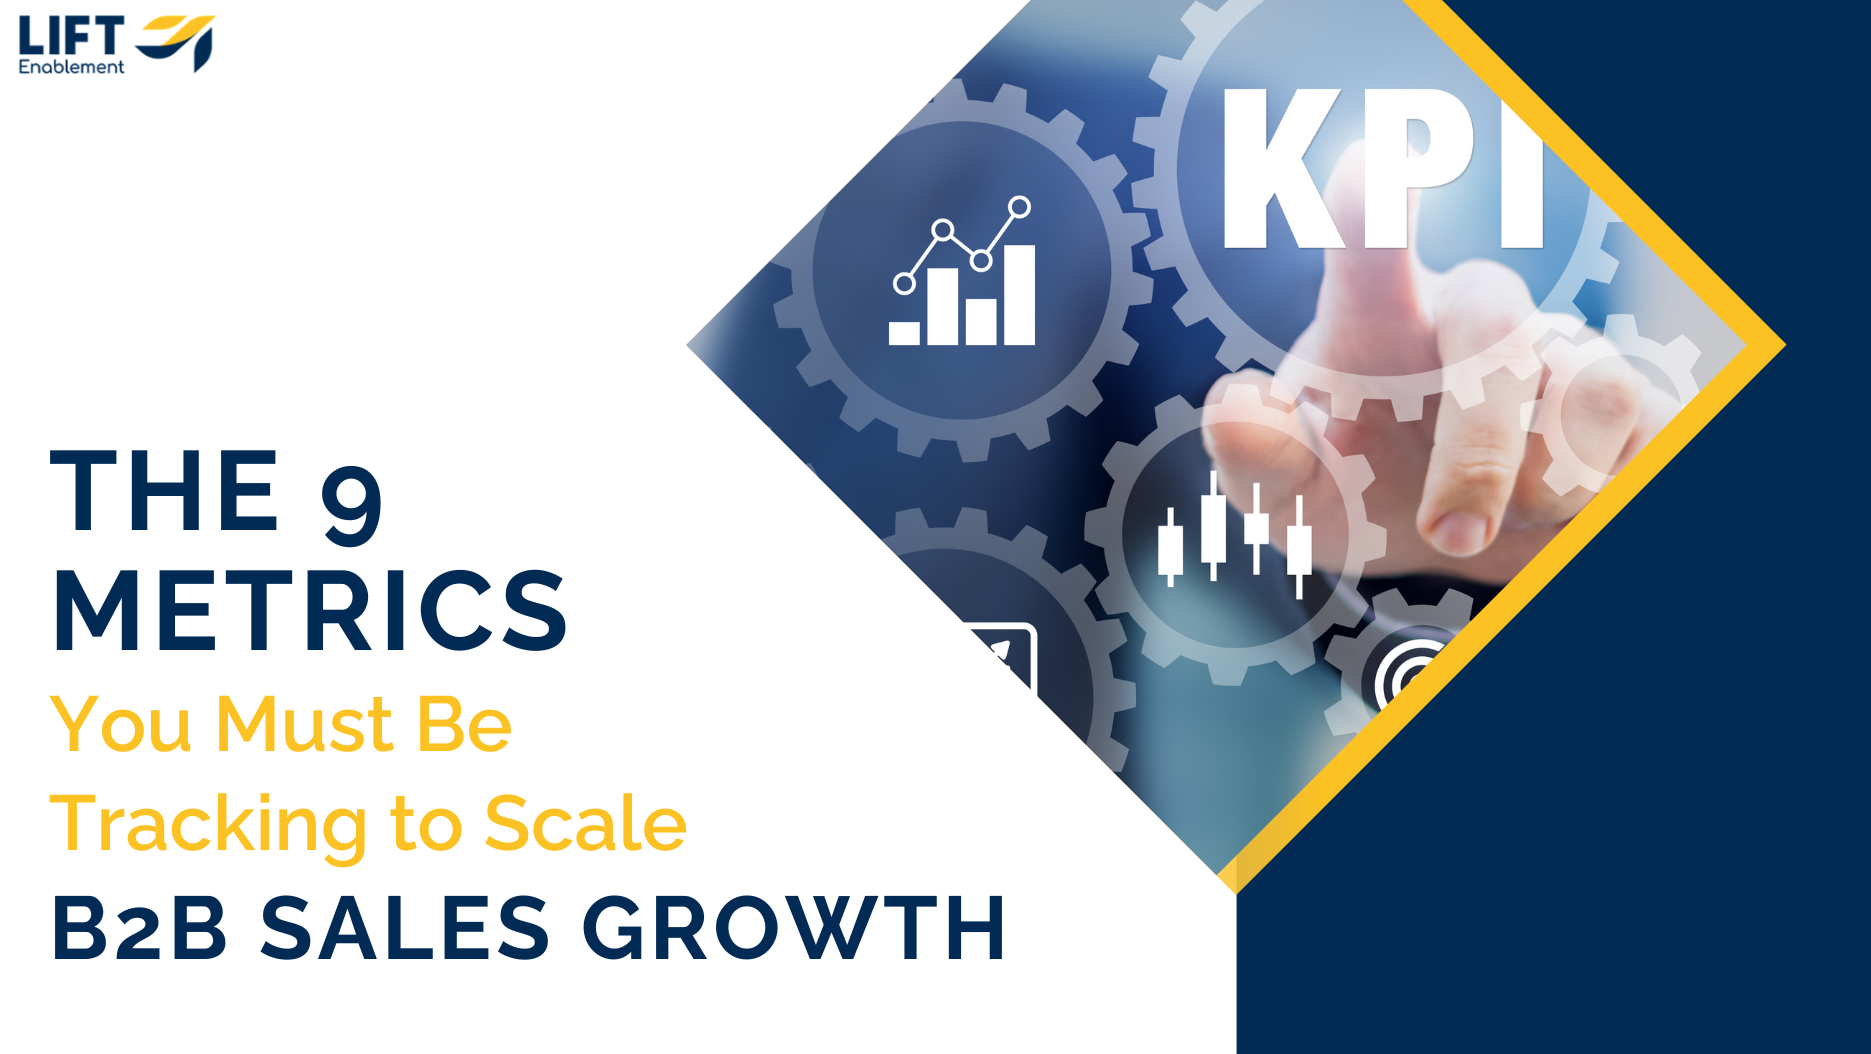 9-metriccs-must-be-tracking-to-scale-growth-cta